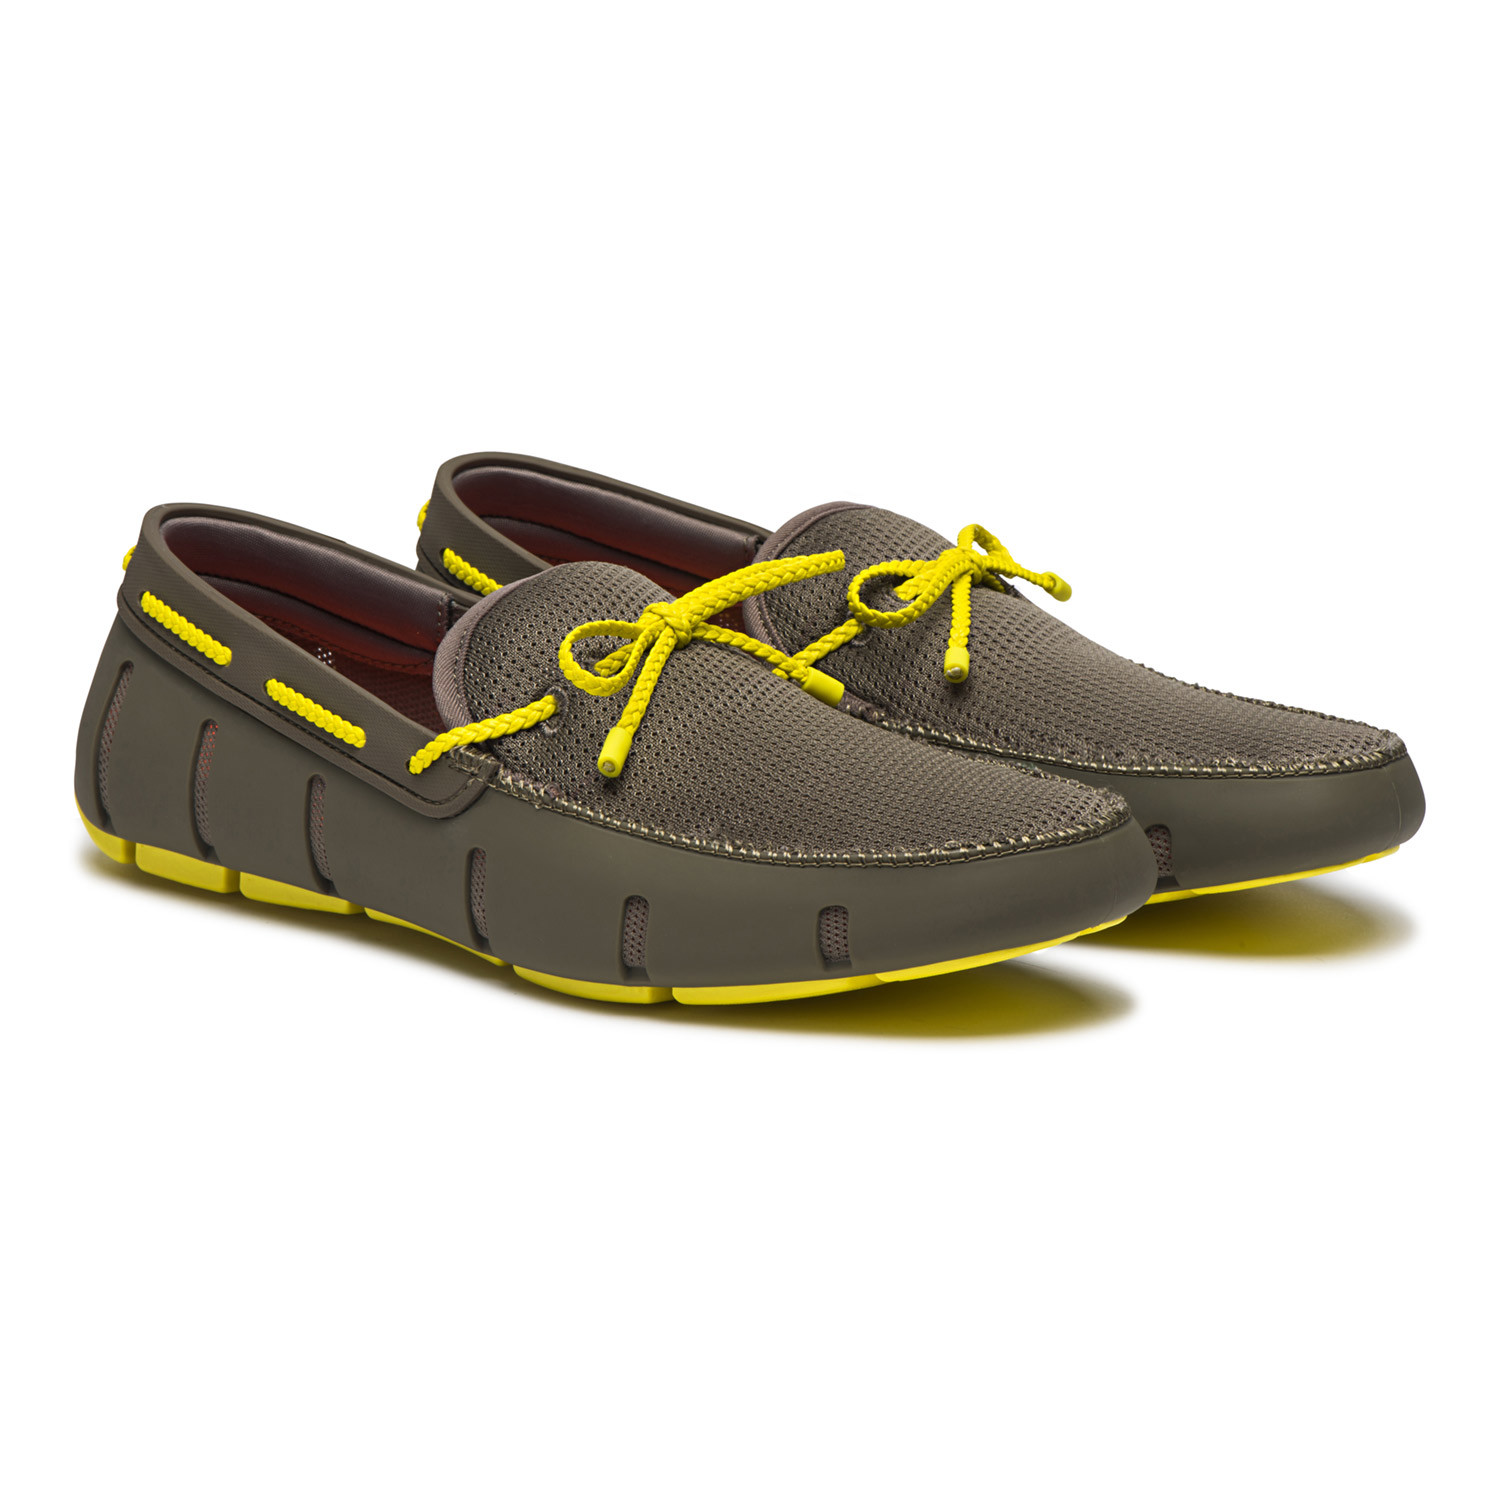 SWIMS Braided Lace Loafer Driver DT in Khaki/Lemon Size 8 